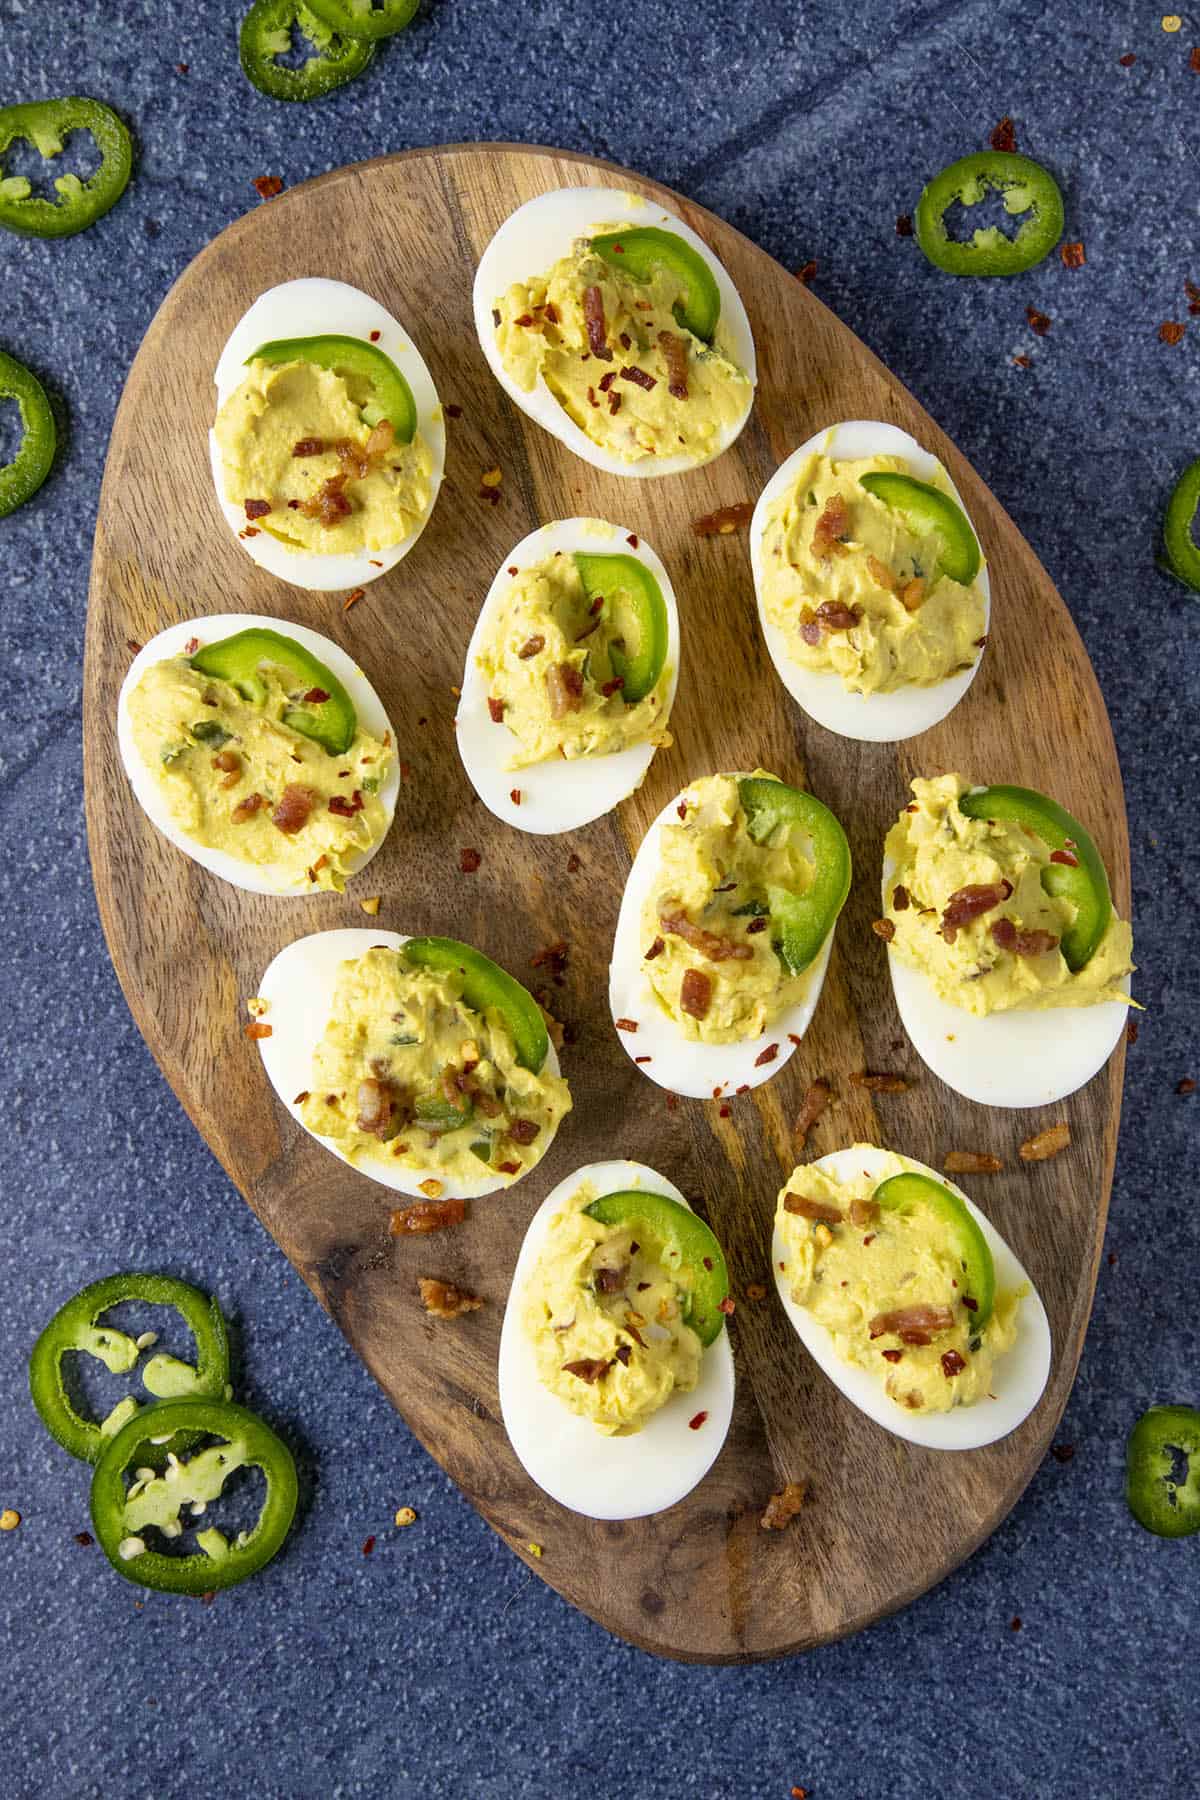 Serving up some Spicy Deviled Eggs with Bacon and Jalapeno